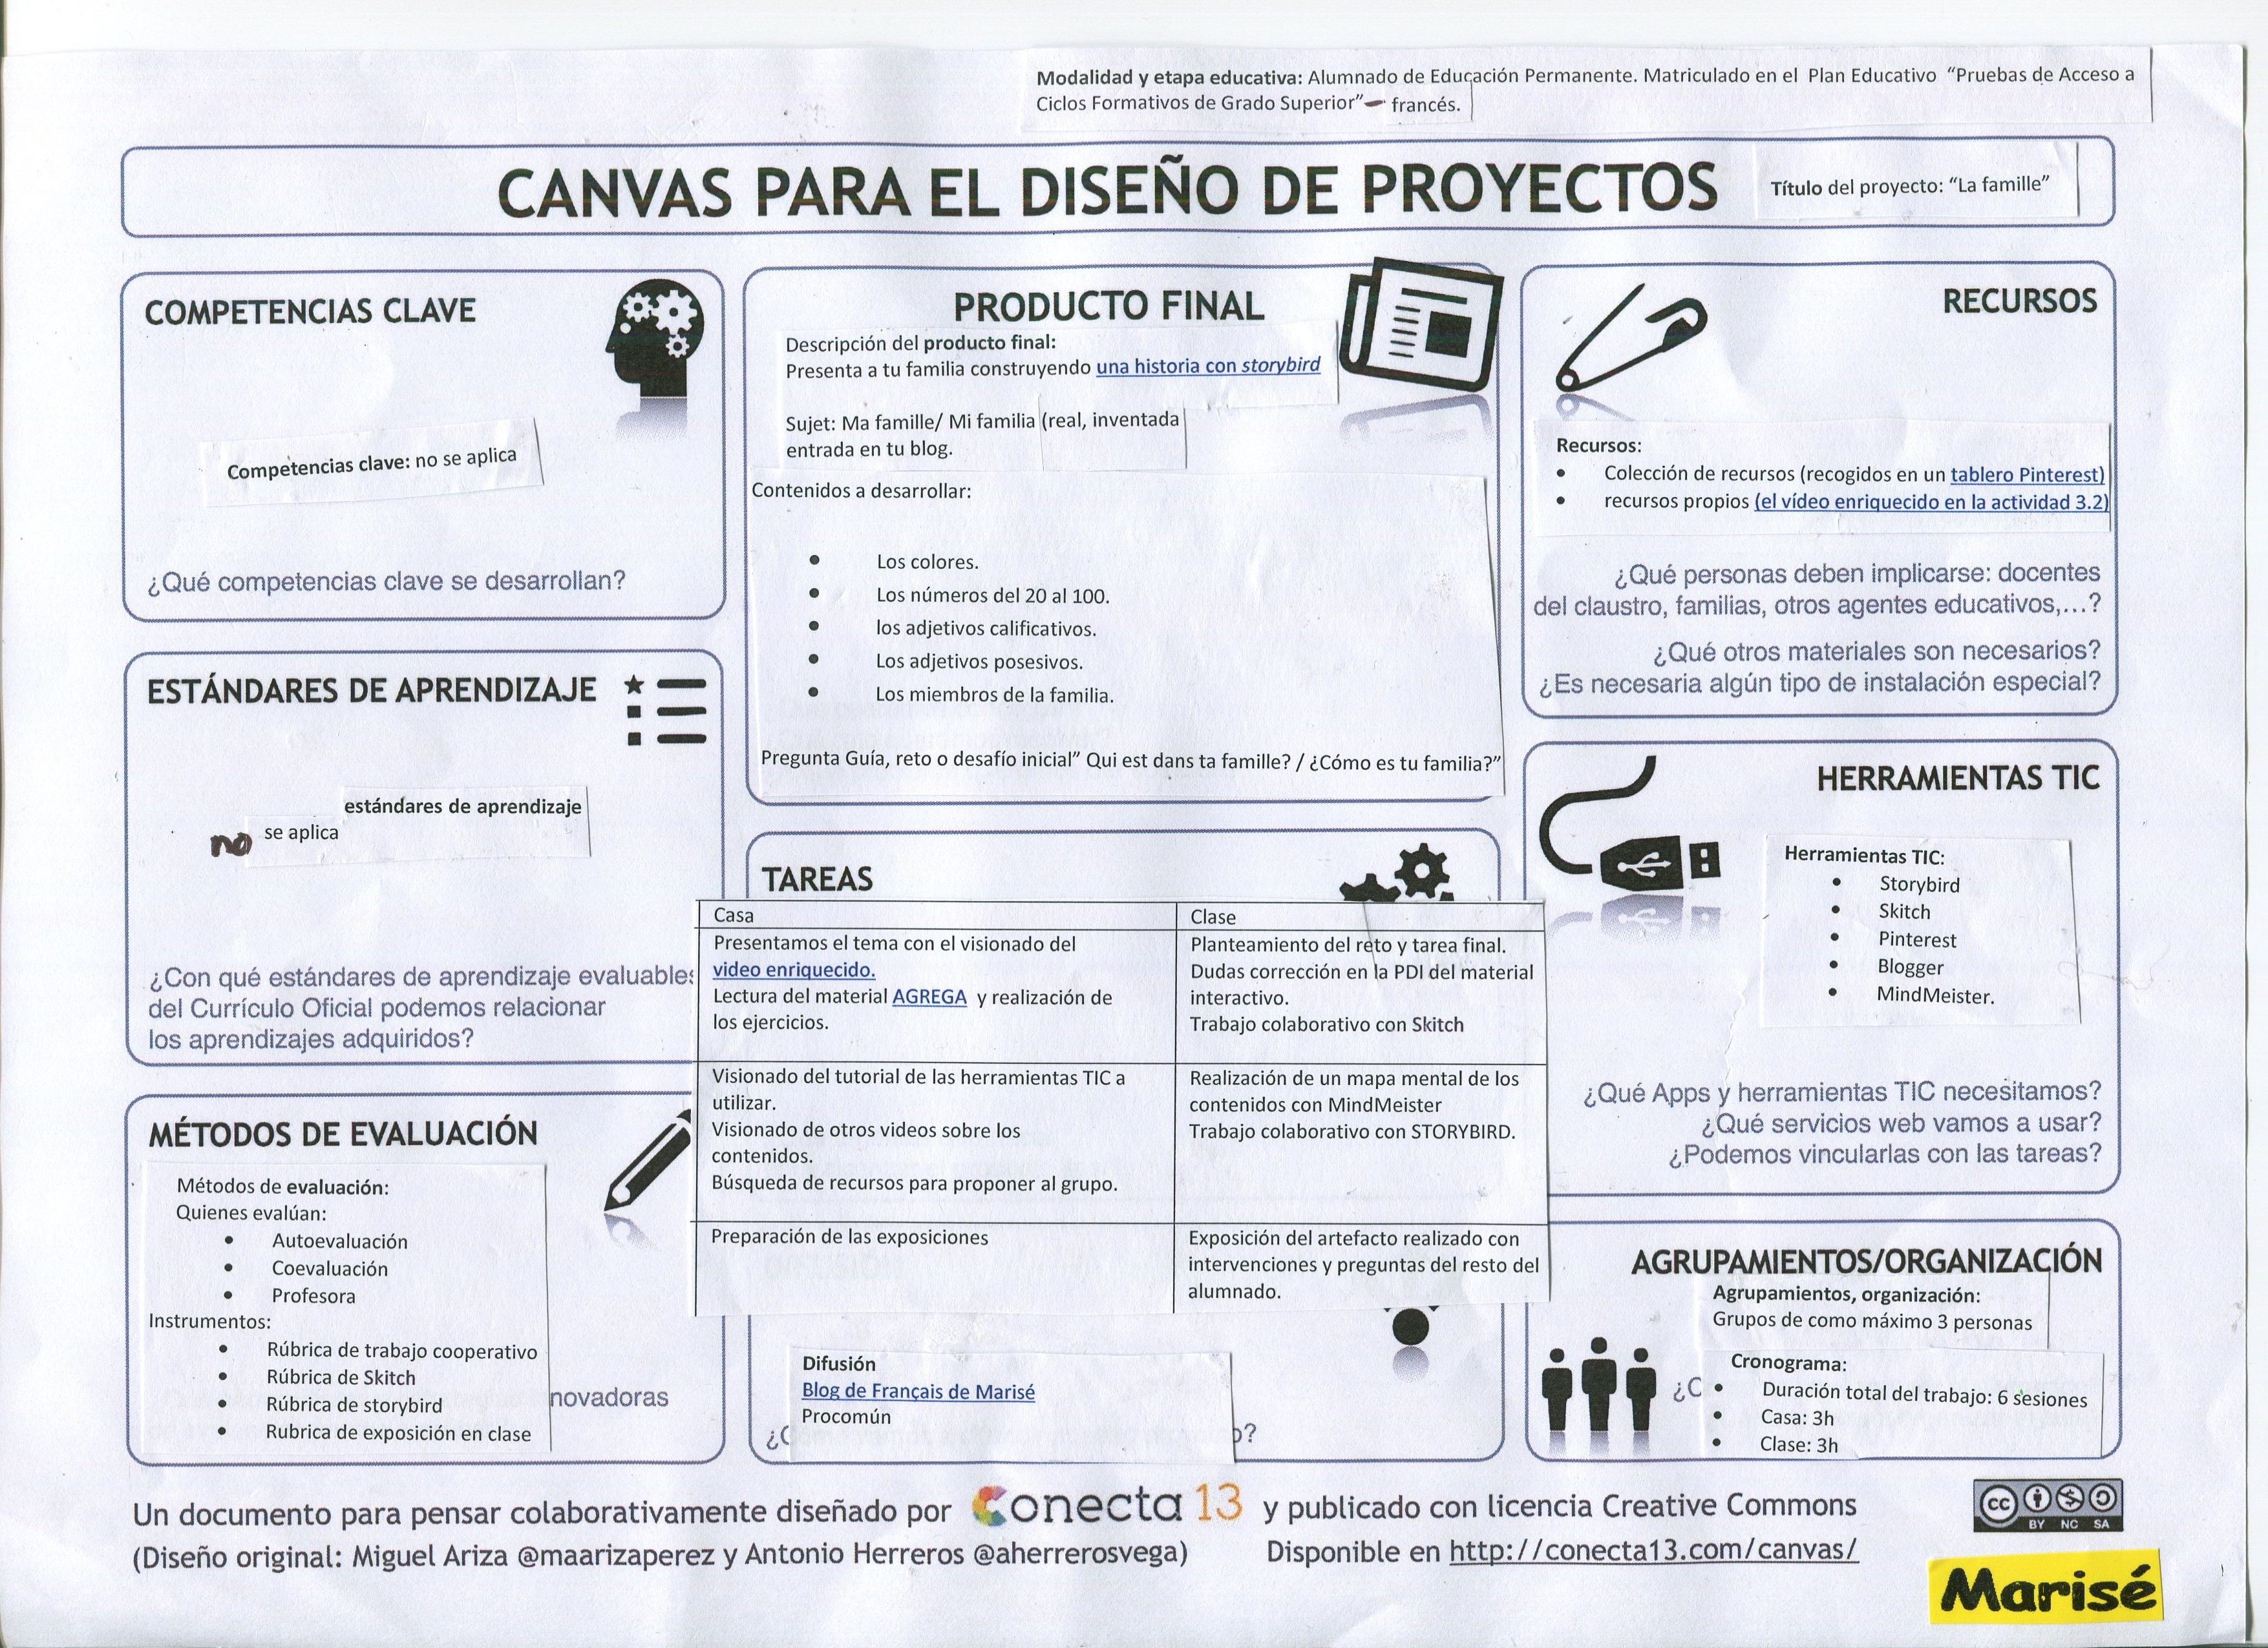  Proyecto ABP-Flipped Classroom: "Ma Famille"